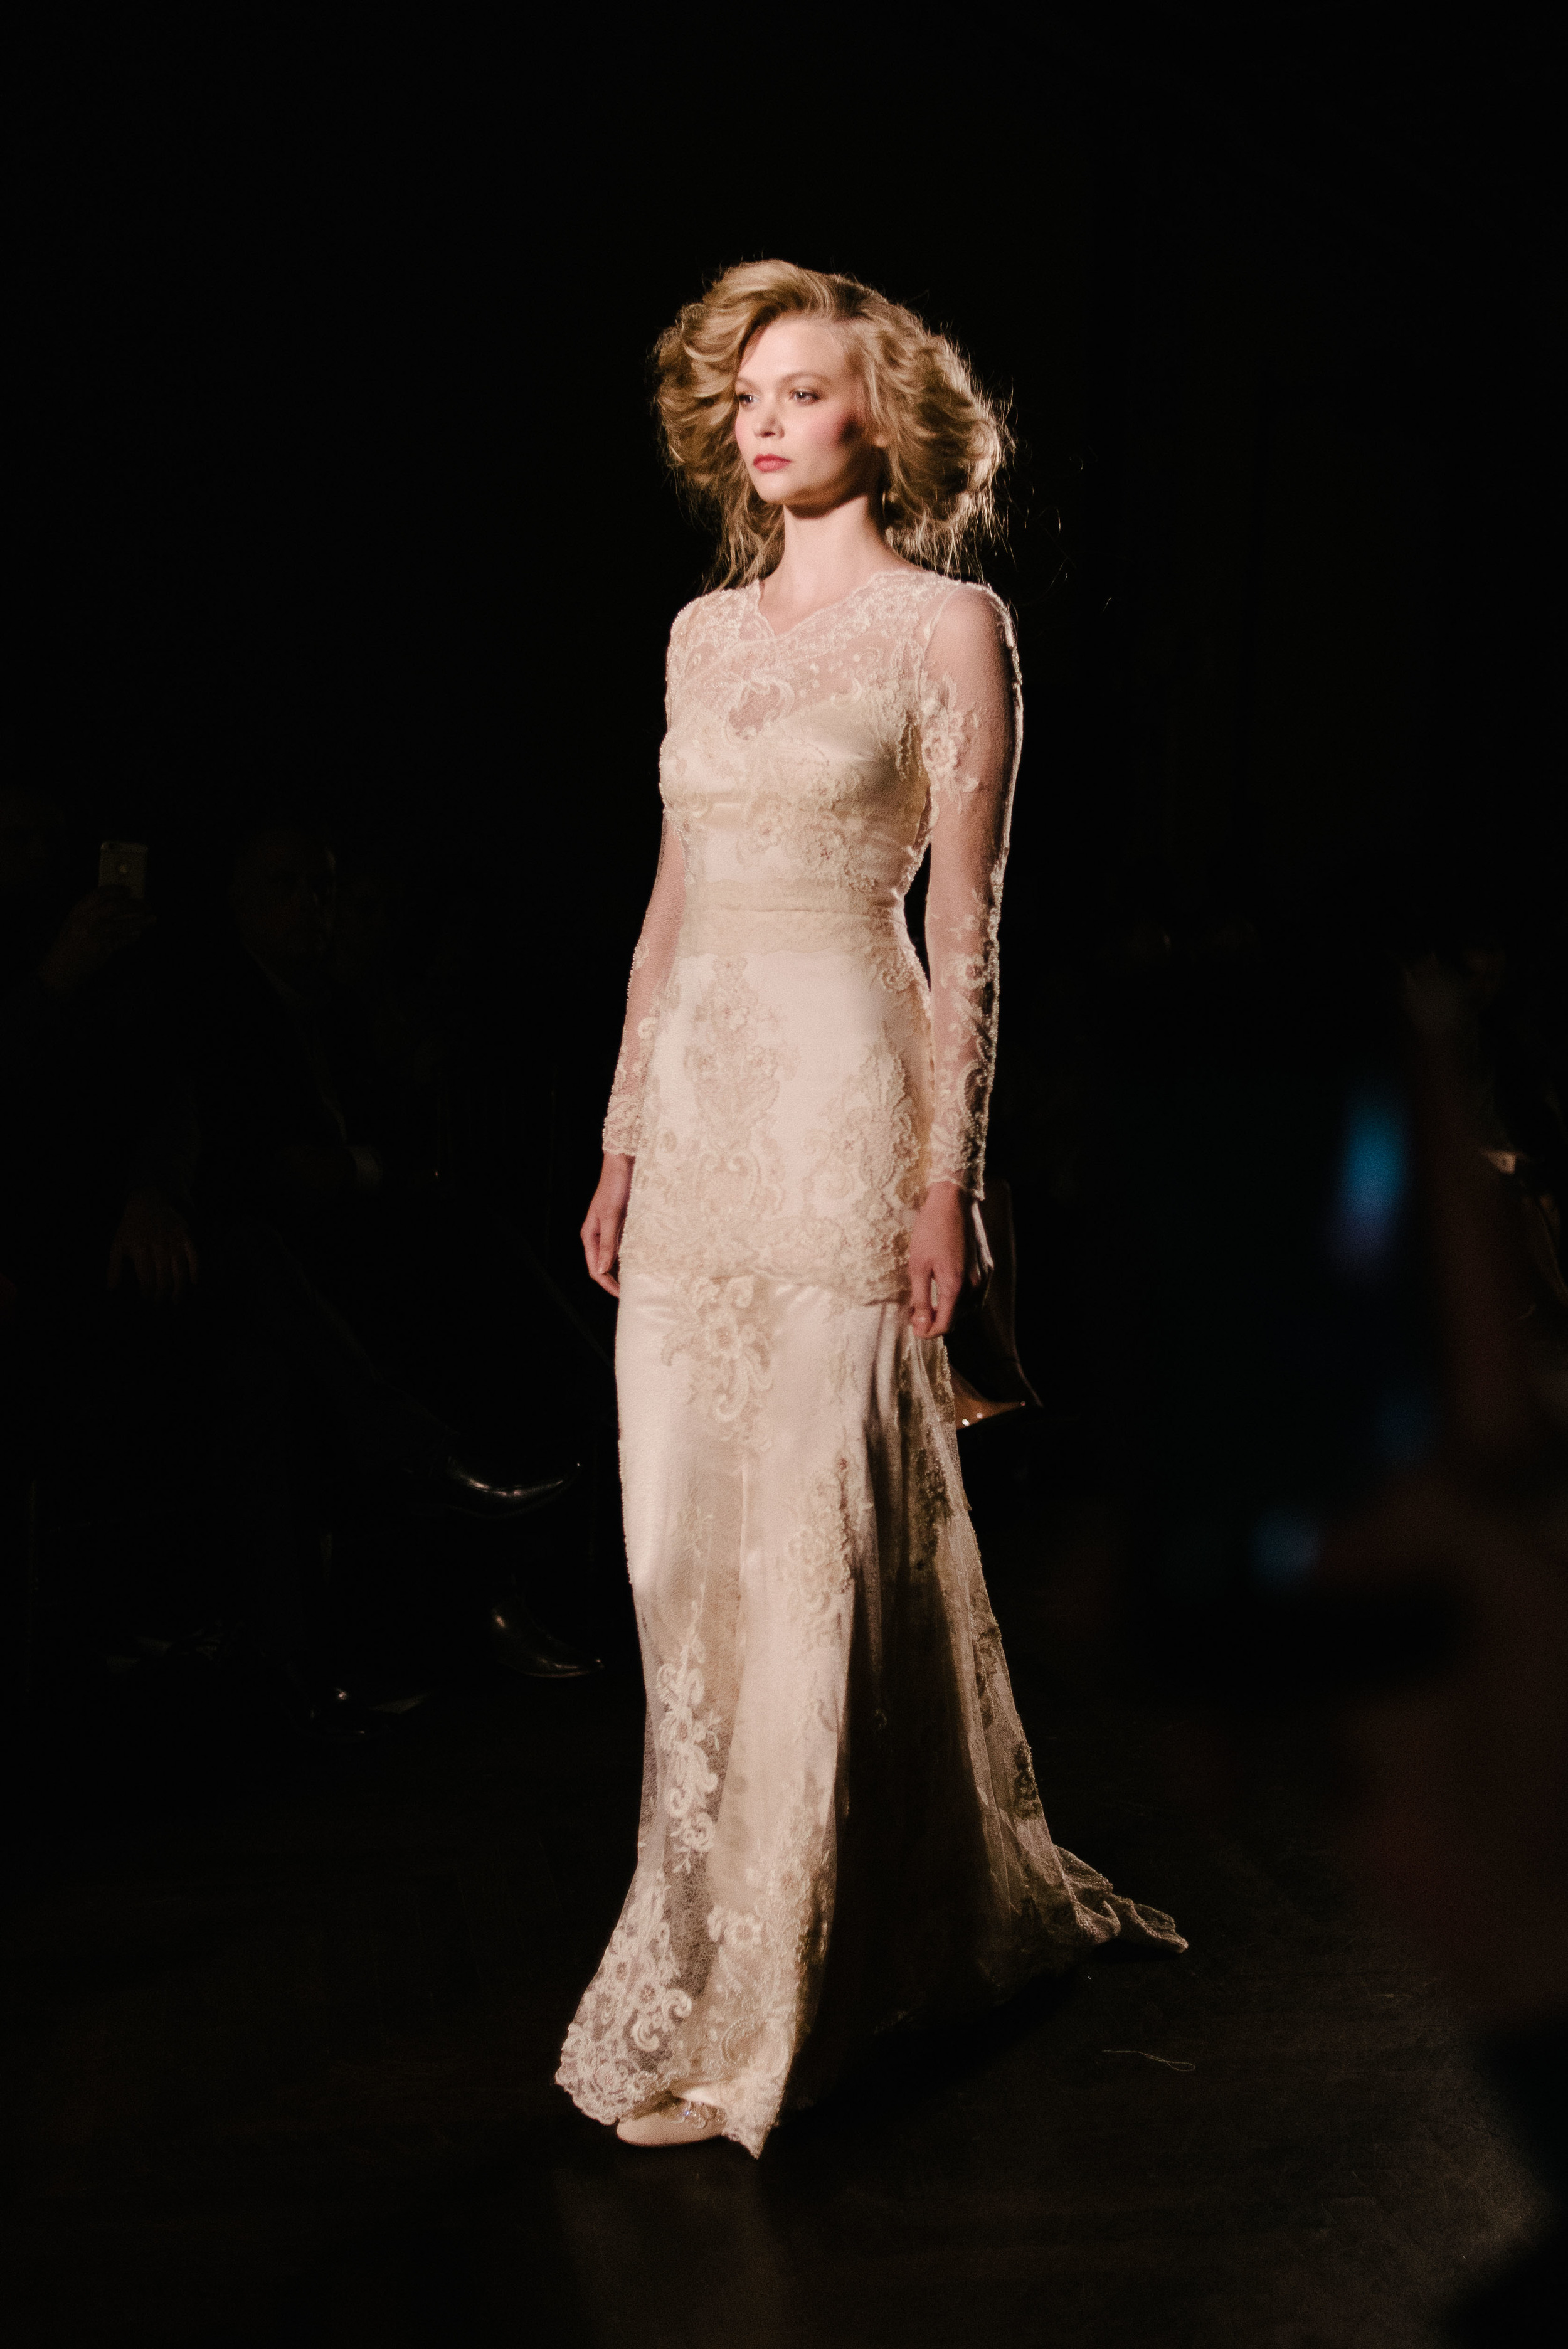  Claire Pettibone | The Gilded Age Collection | Little White Dress Bridal Shop 